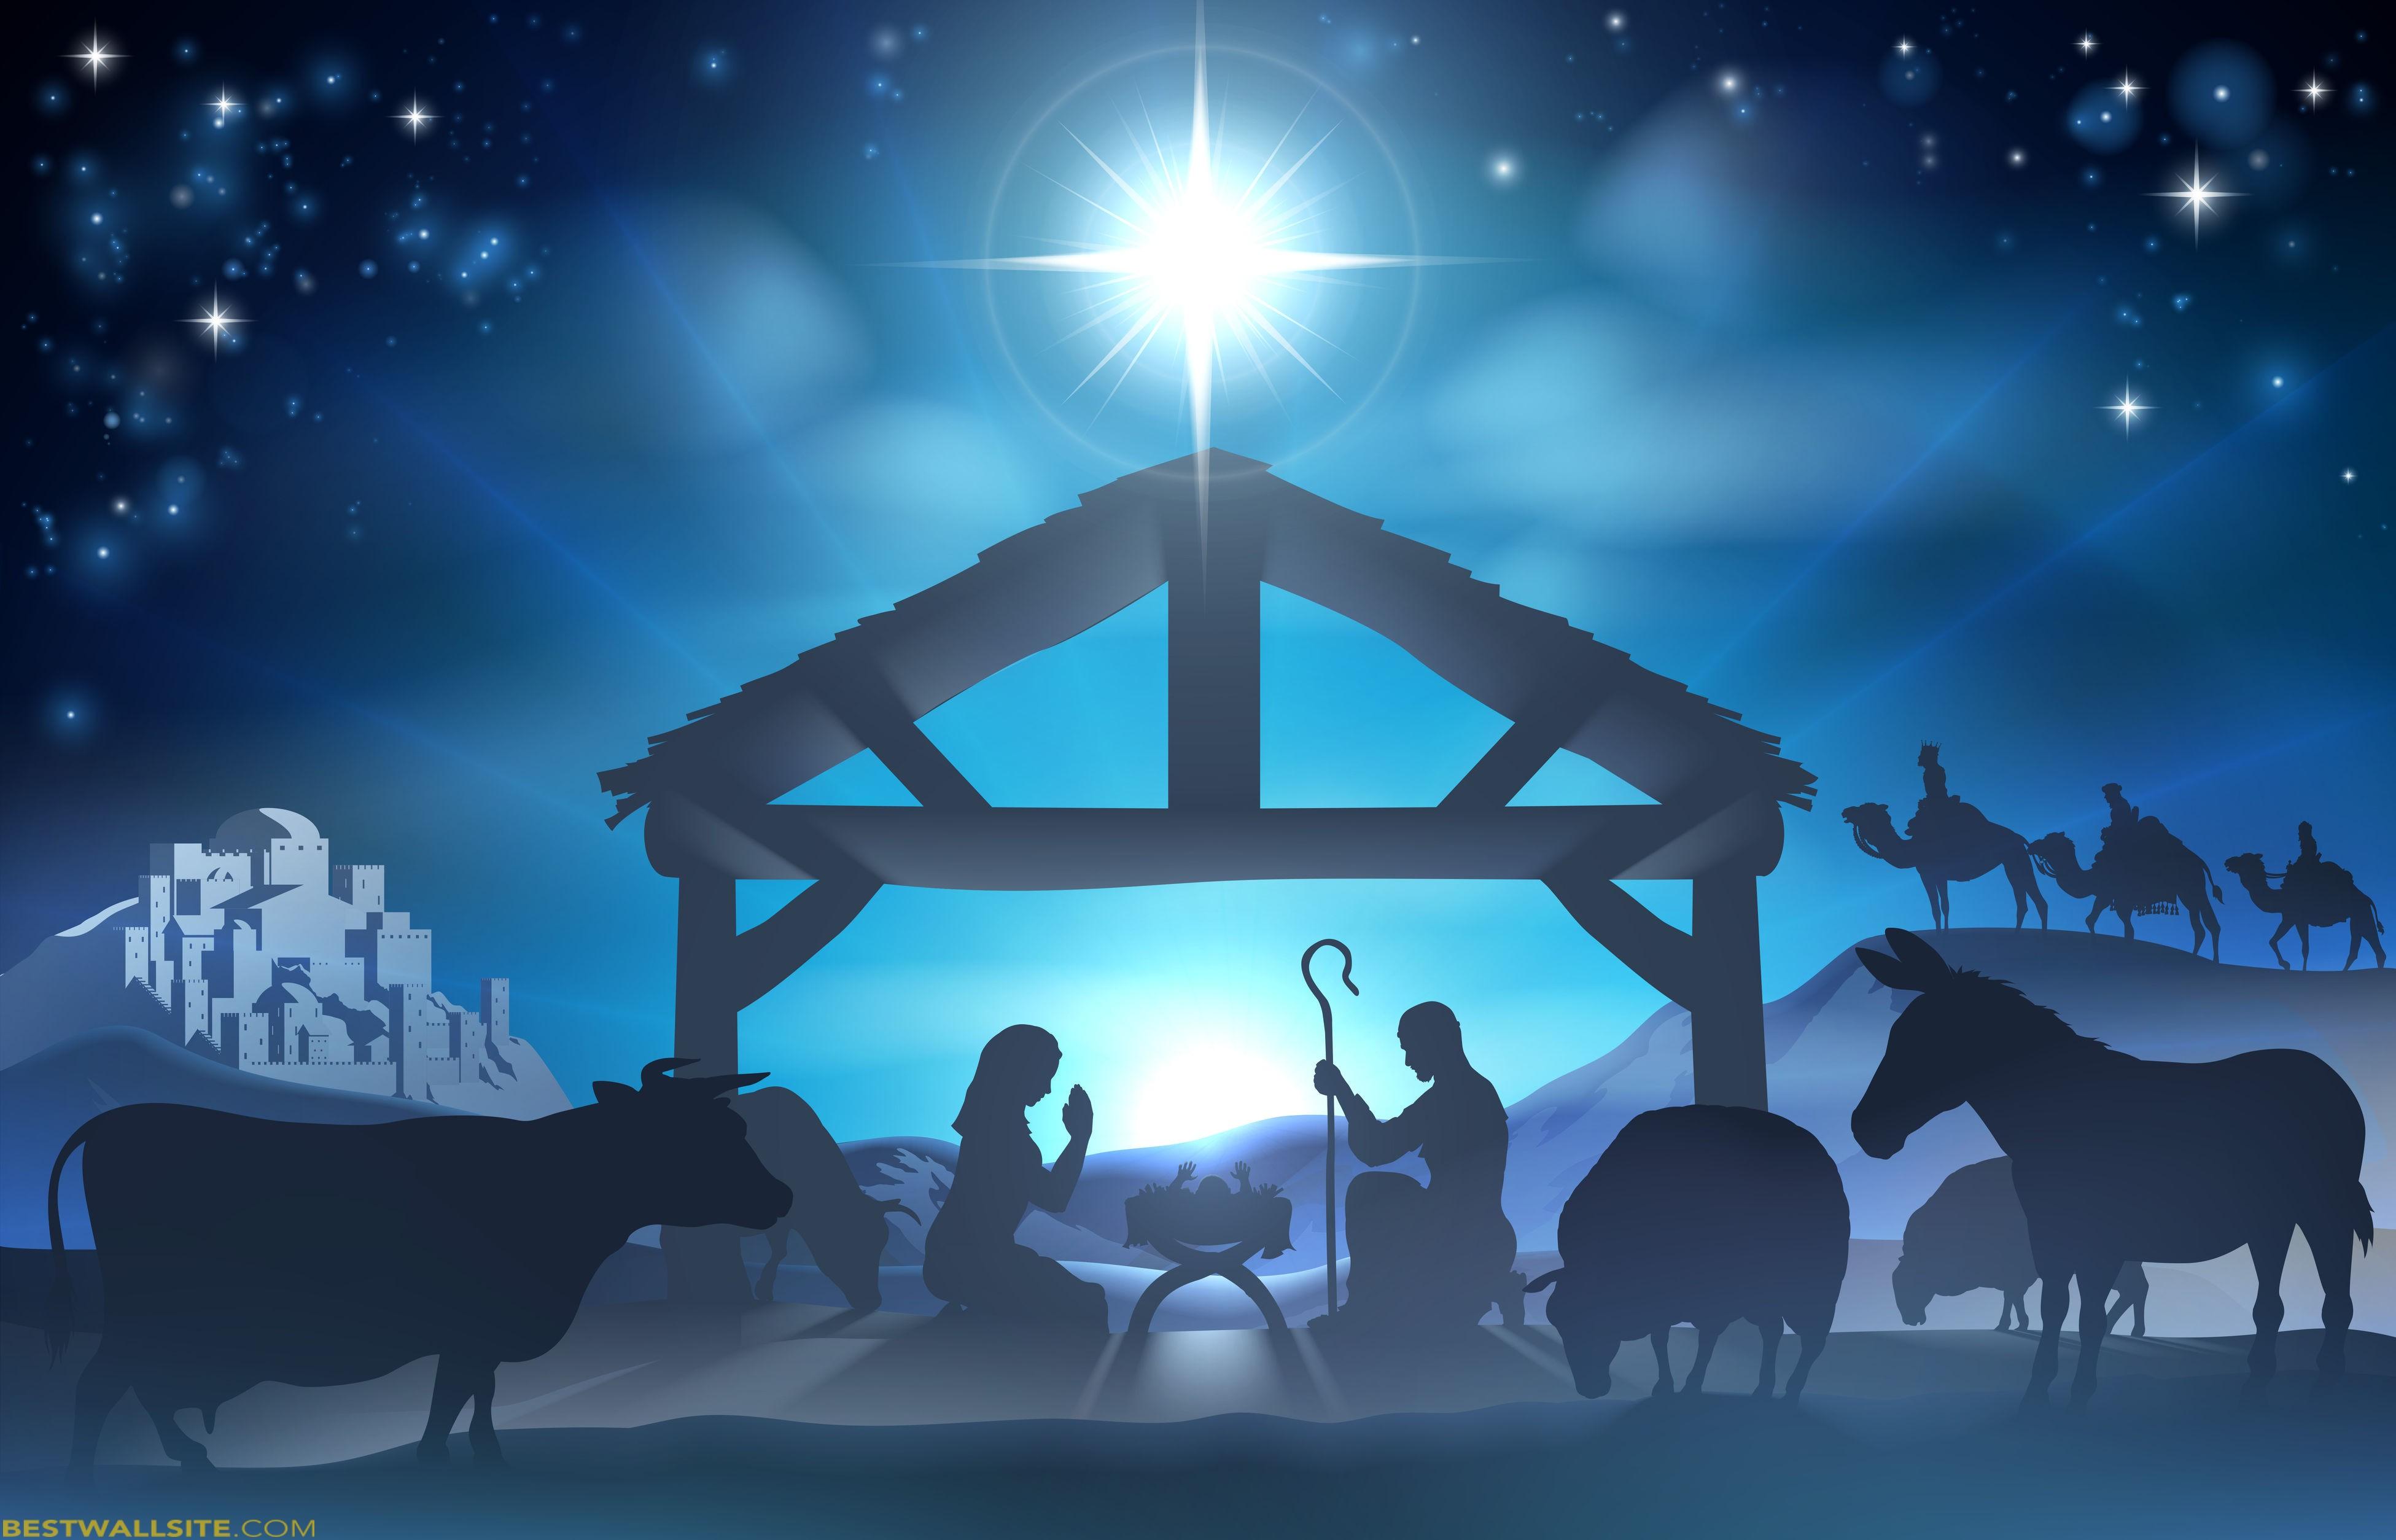 Free download Christmas Nativity Scene Wallpaper Related